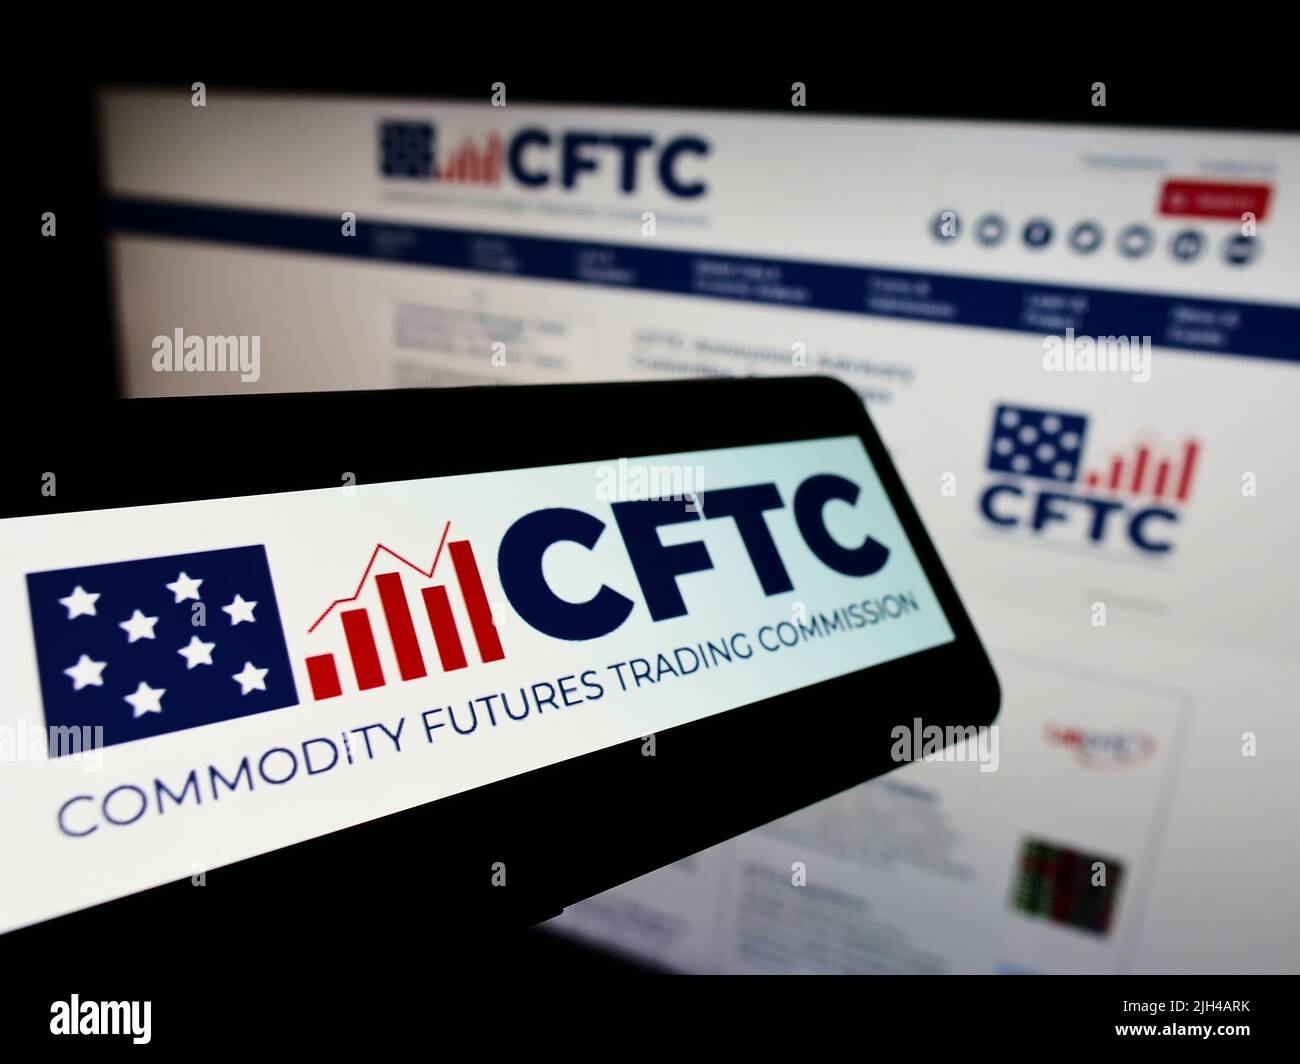 Smartphone with logo of American Commodity Futures Trading Commission (CFTC) on screen in front of website. Focus on center of phone display. Stock Photo